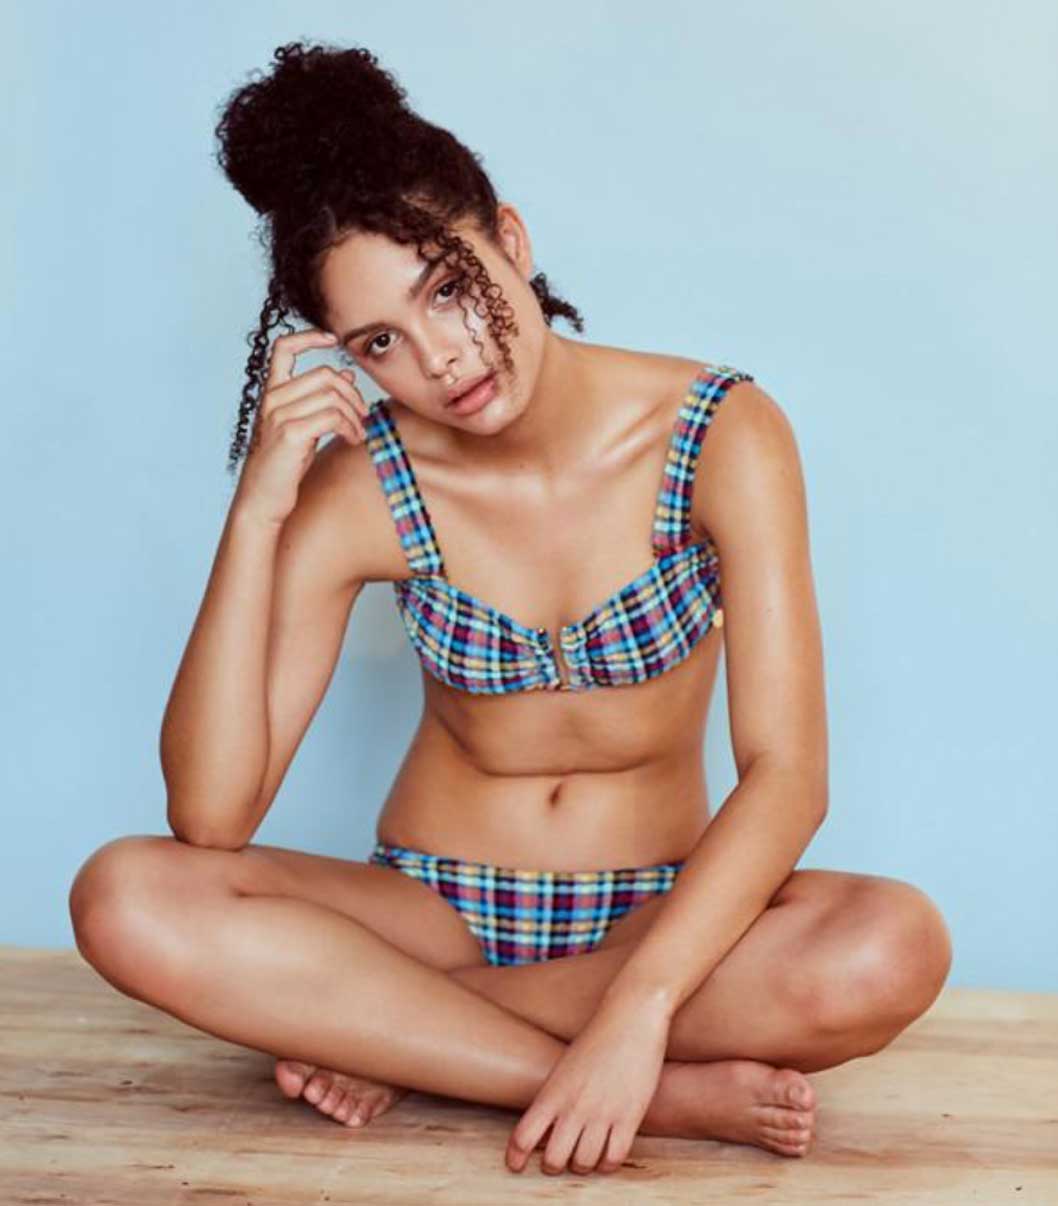 Ethical and sustainable swim wear brands 2019 lilliput and Felix bikini barre